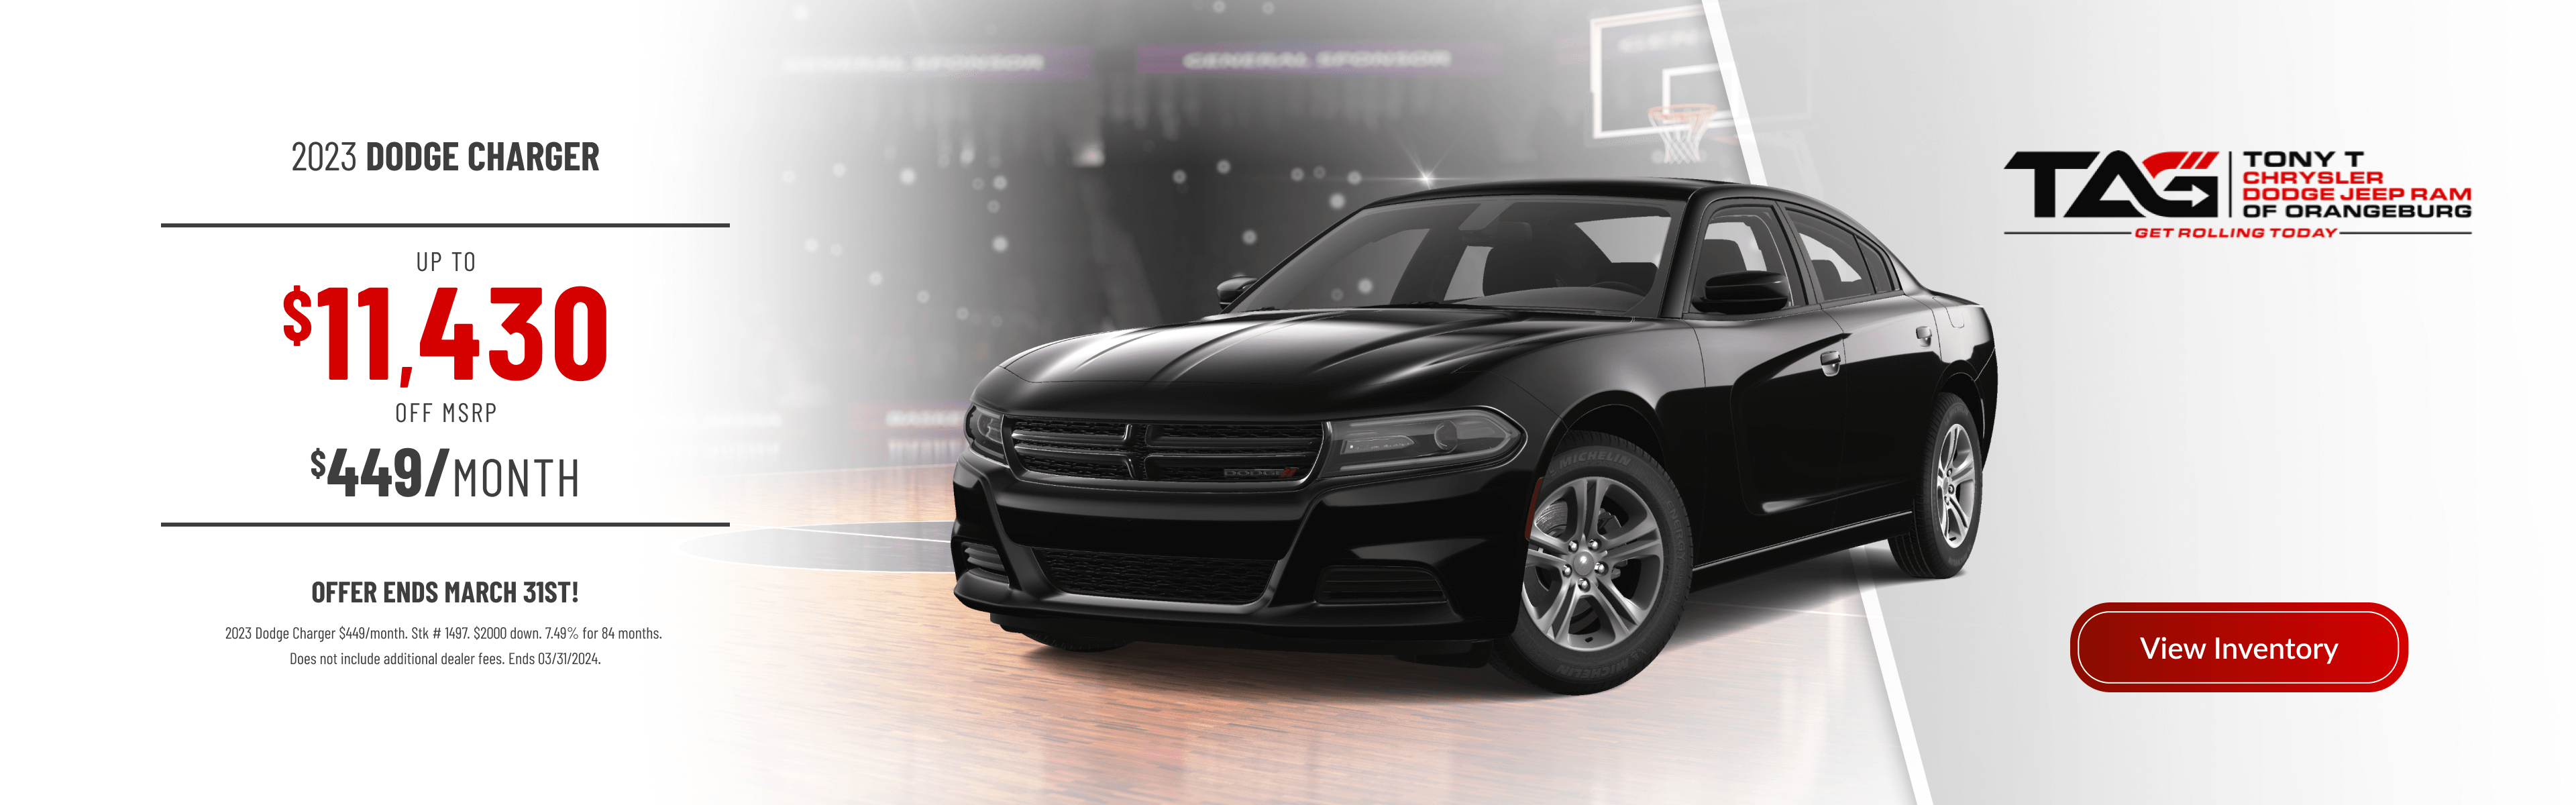 2023 Dodge Charger Deal